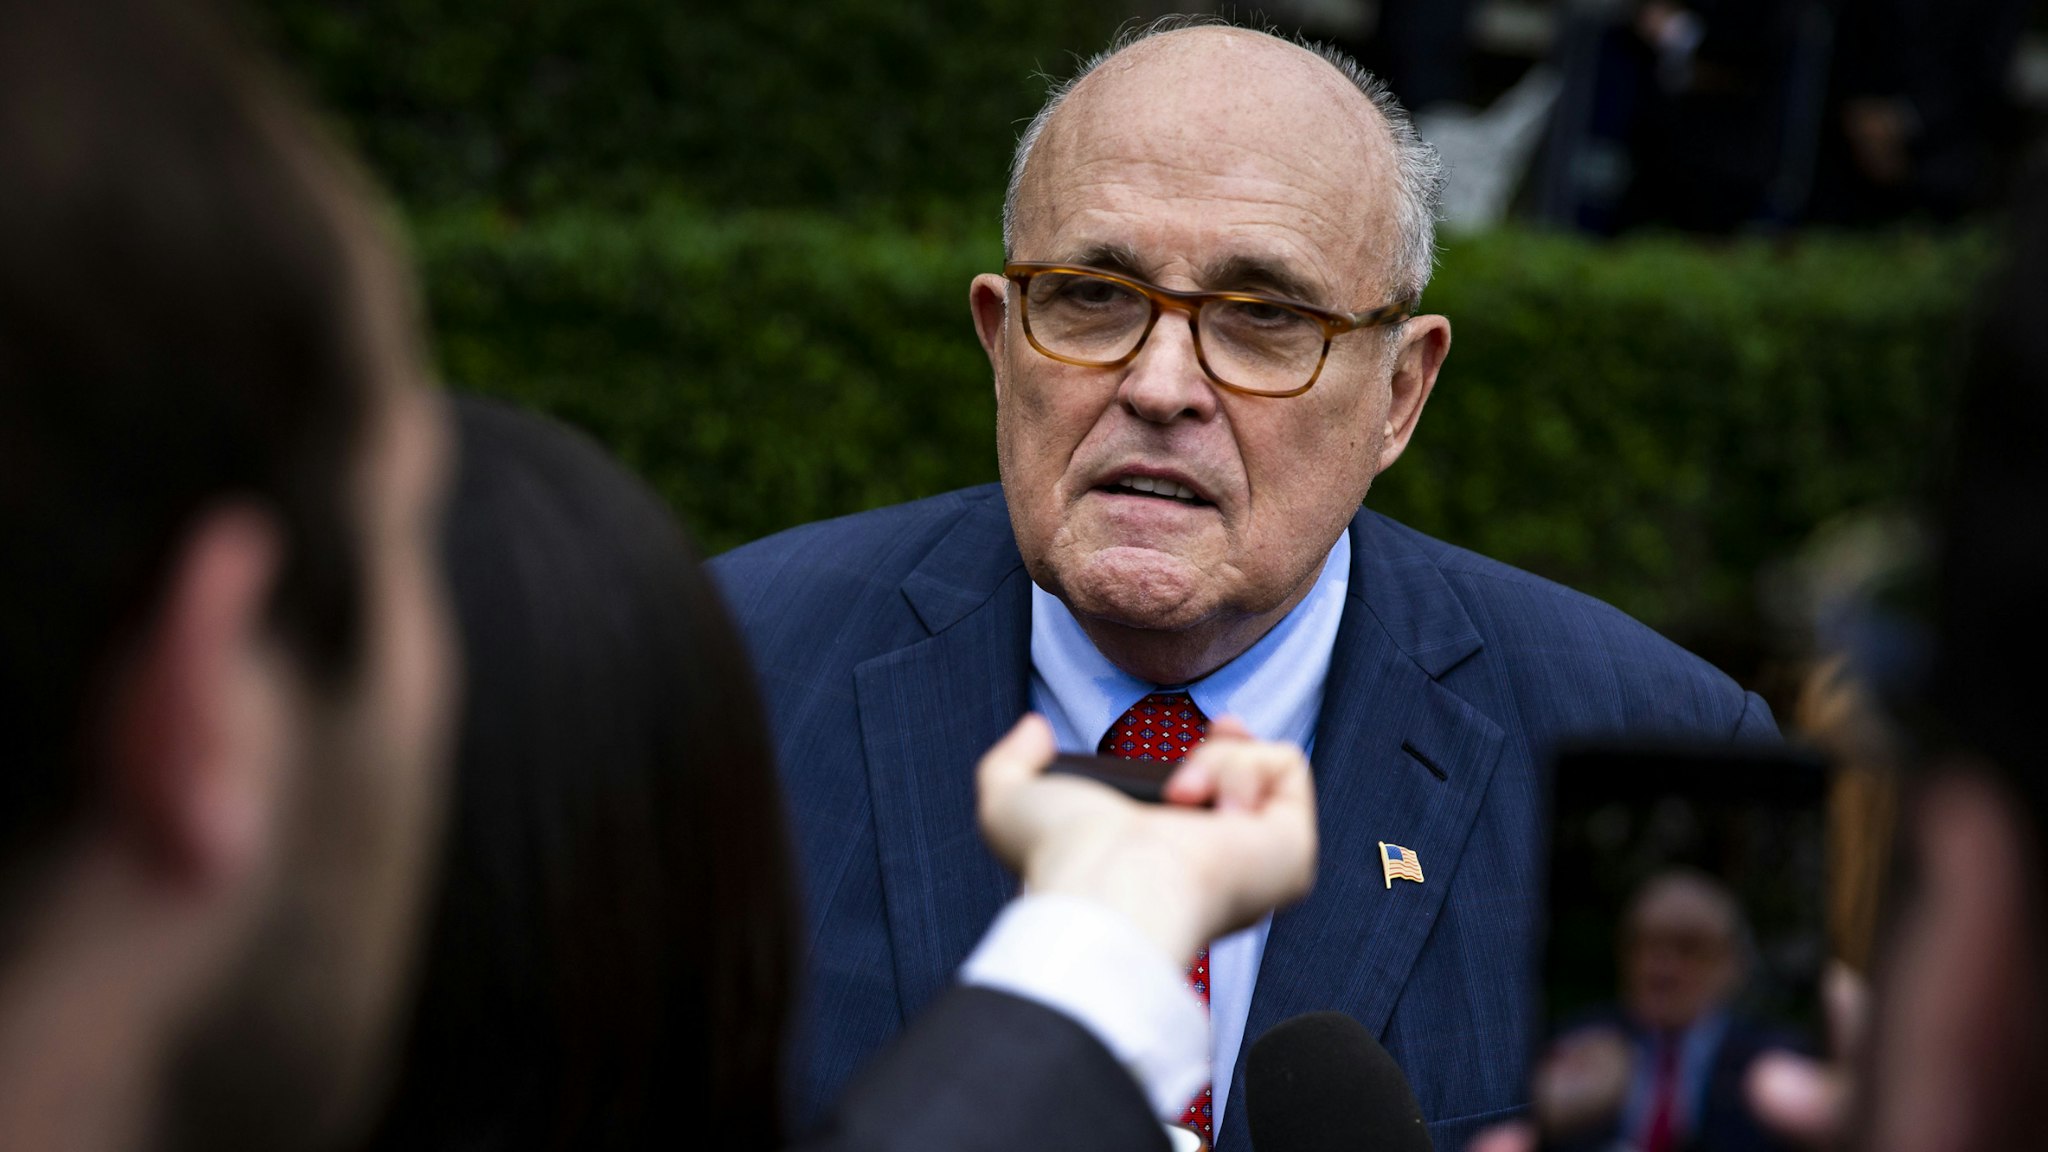 Rudy Giuliani, former mayor of New York, speaks with reporters during the White House Sports and Fitness Day event on the South Lawn of the White House in Washington, D.C., U.S., on Wednesday, May 30, 2018.